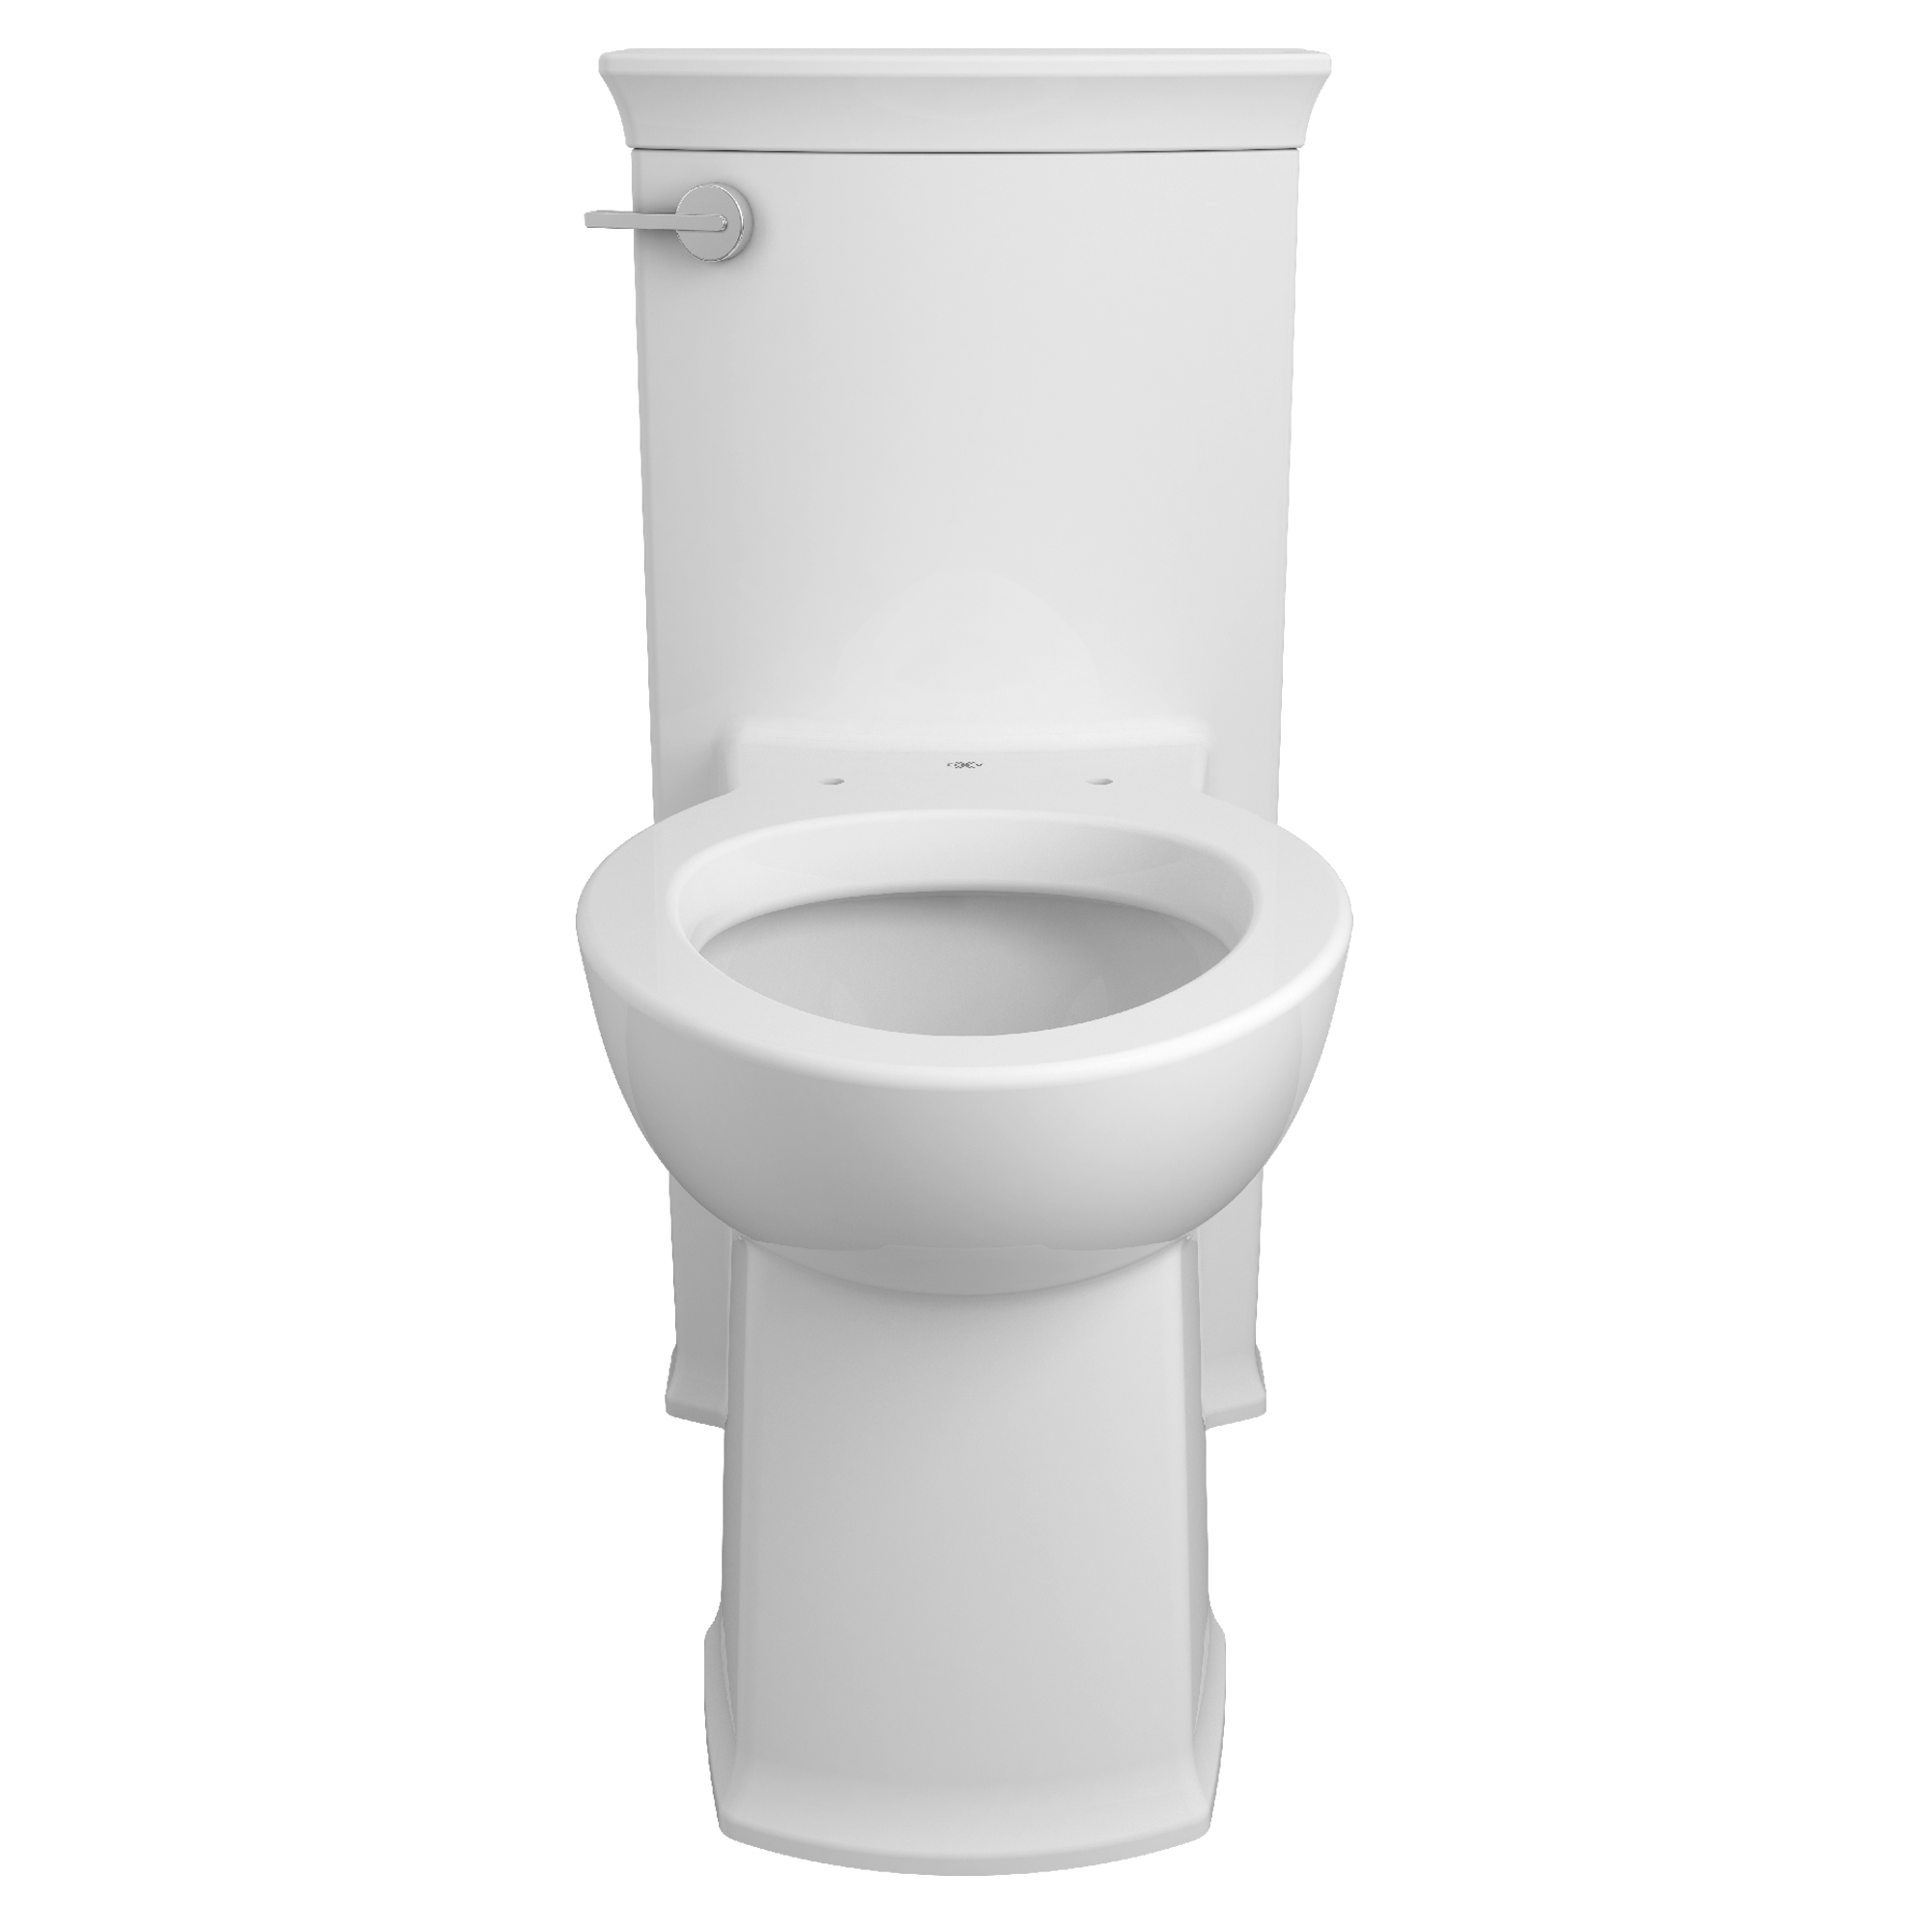 Wyatt® One-Piece Chair-Height Left-Hand Trip Lever Elongated Toilet with Seat